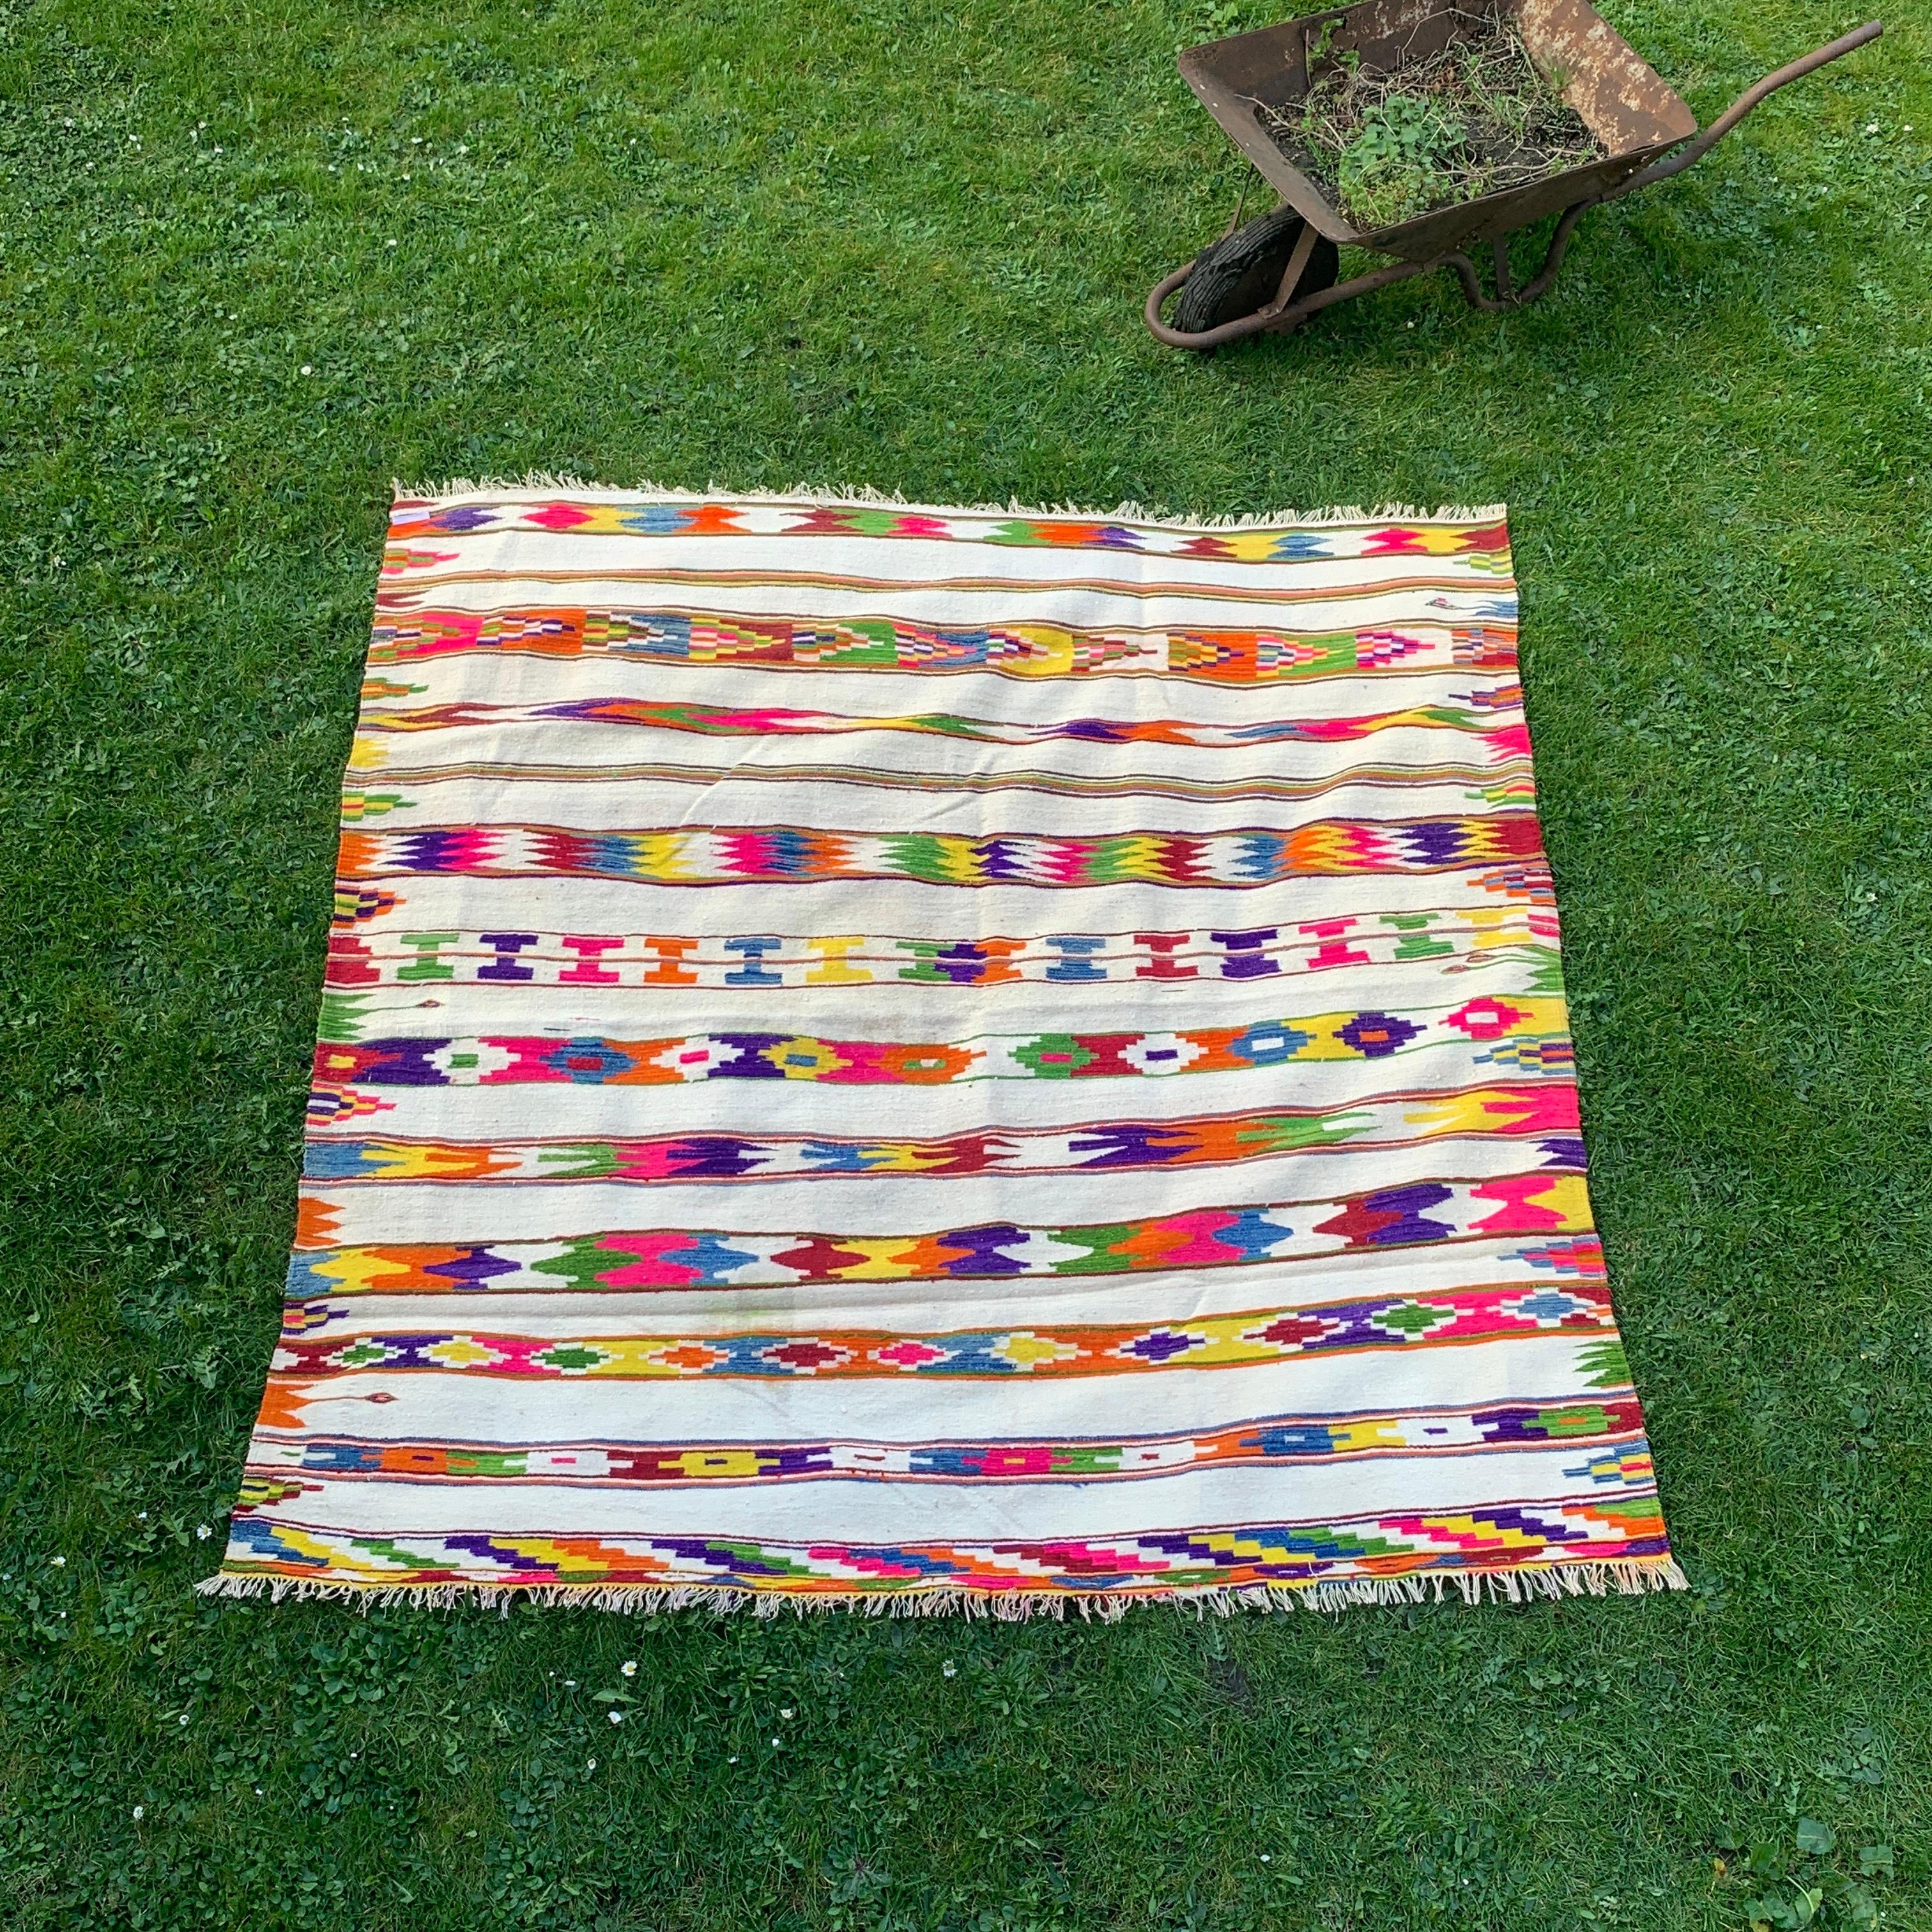 A beautiful multicoloured square rug in warm colour pallet that could be used on either can be side, making it versatile and functional. 

The base of the rug is a light beige colour, providing a neutral background for the vibrant geometric patterns